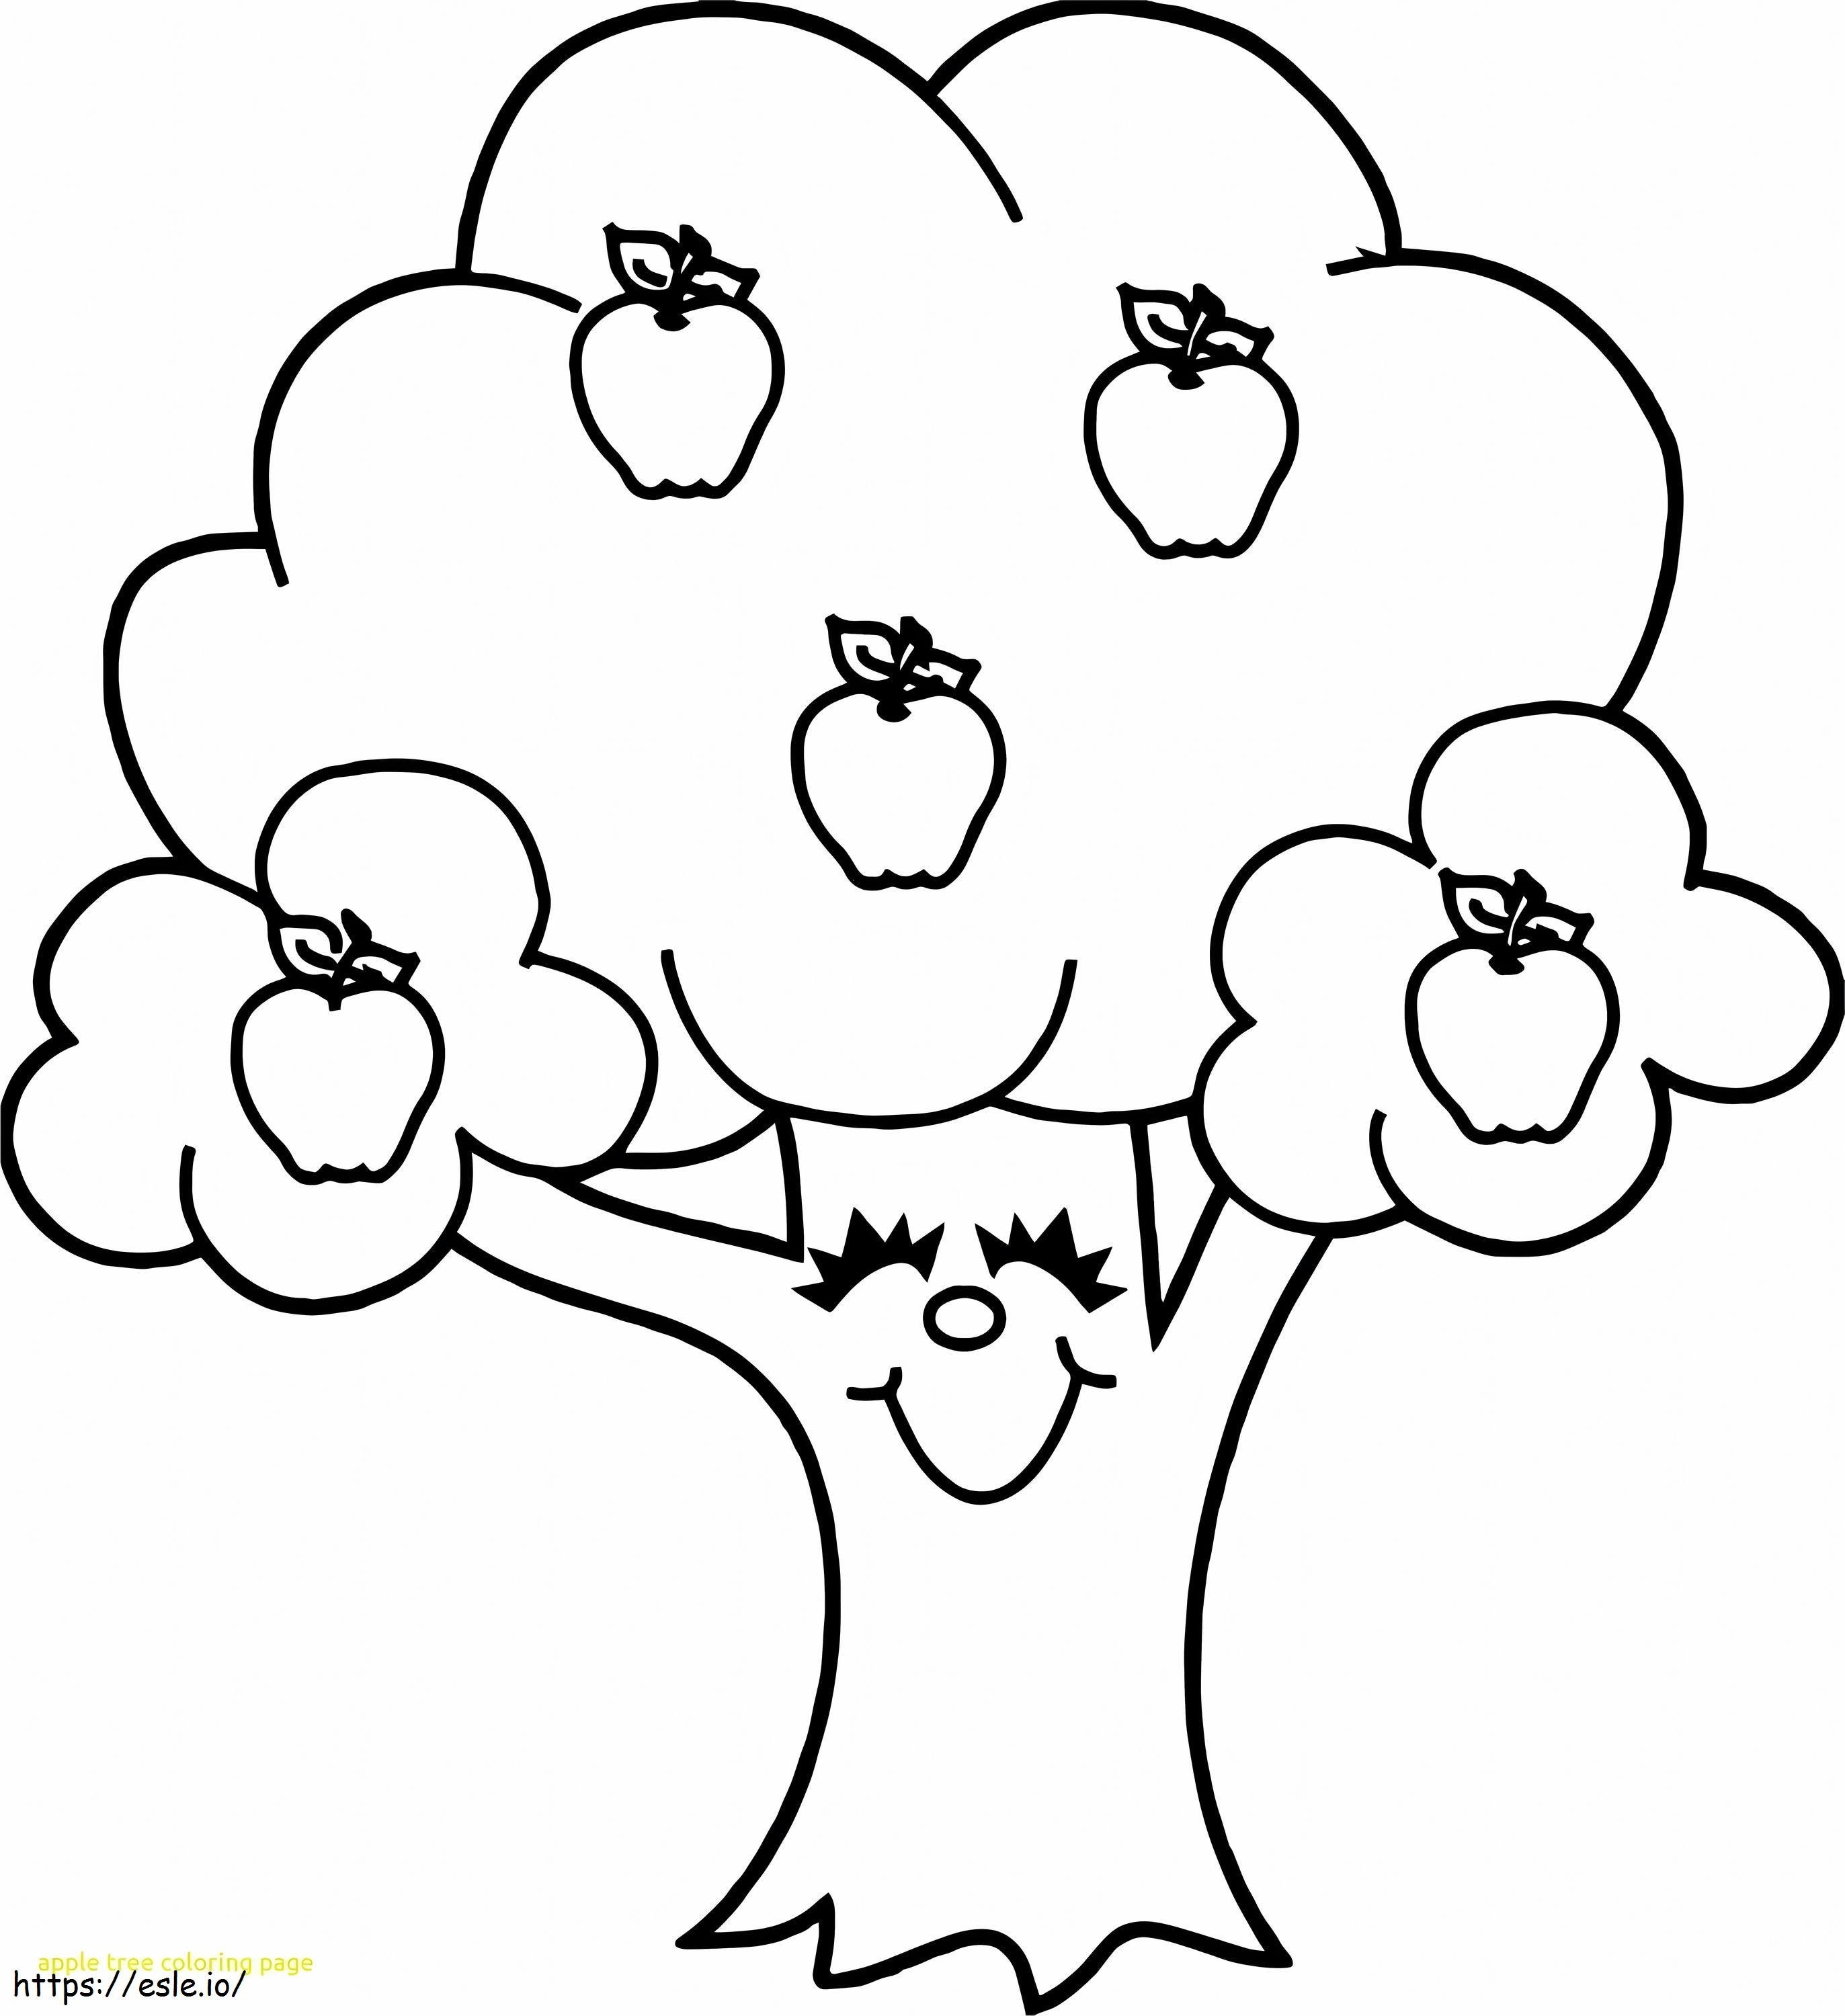 Nice Apple Tree coloring page